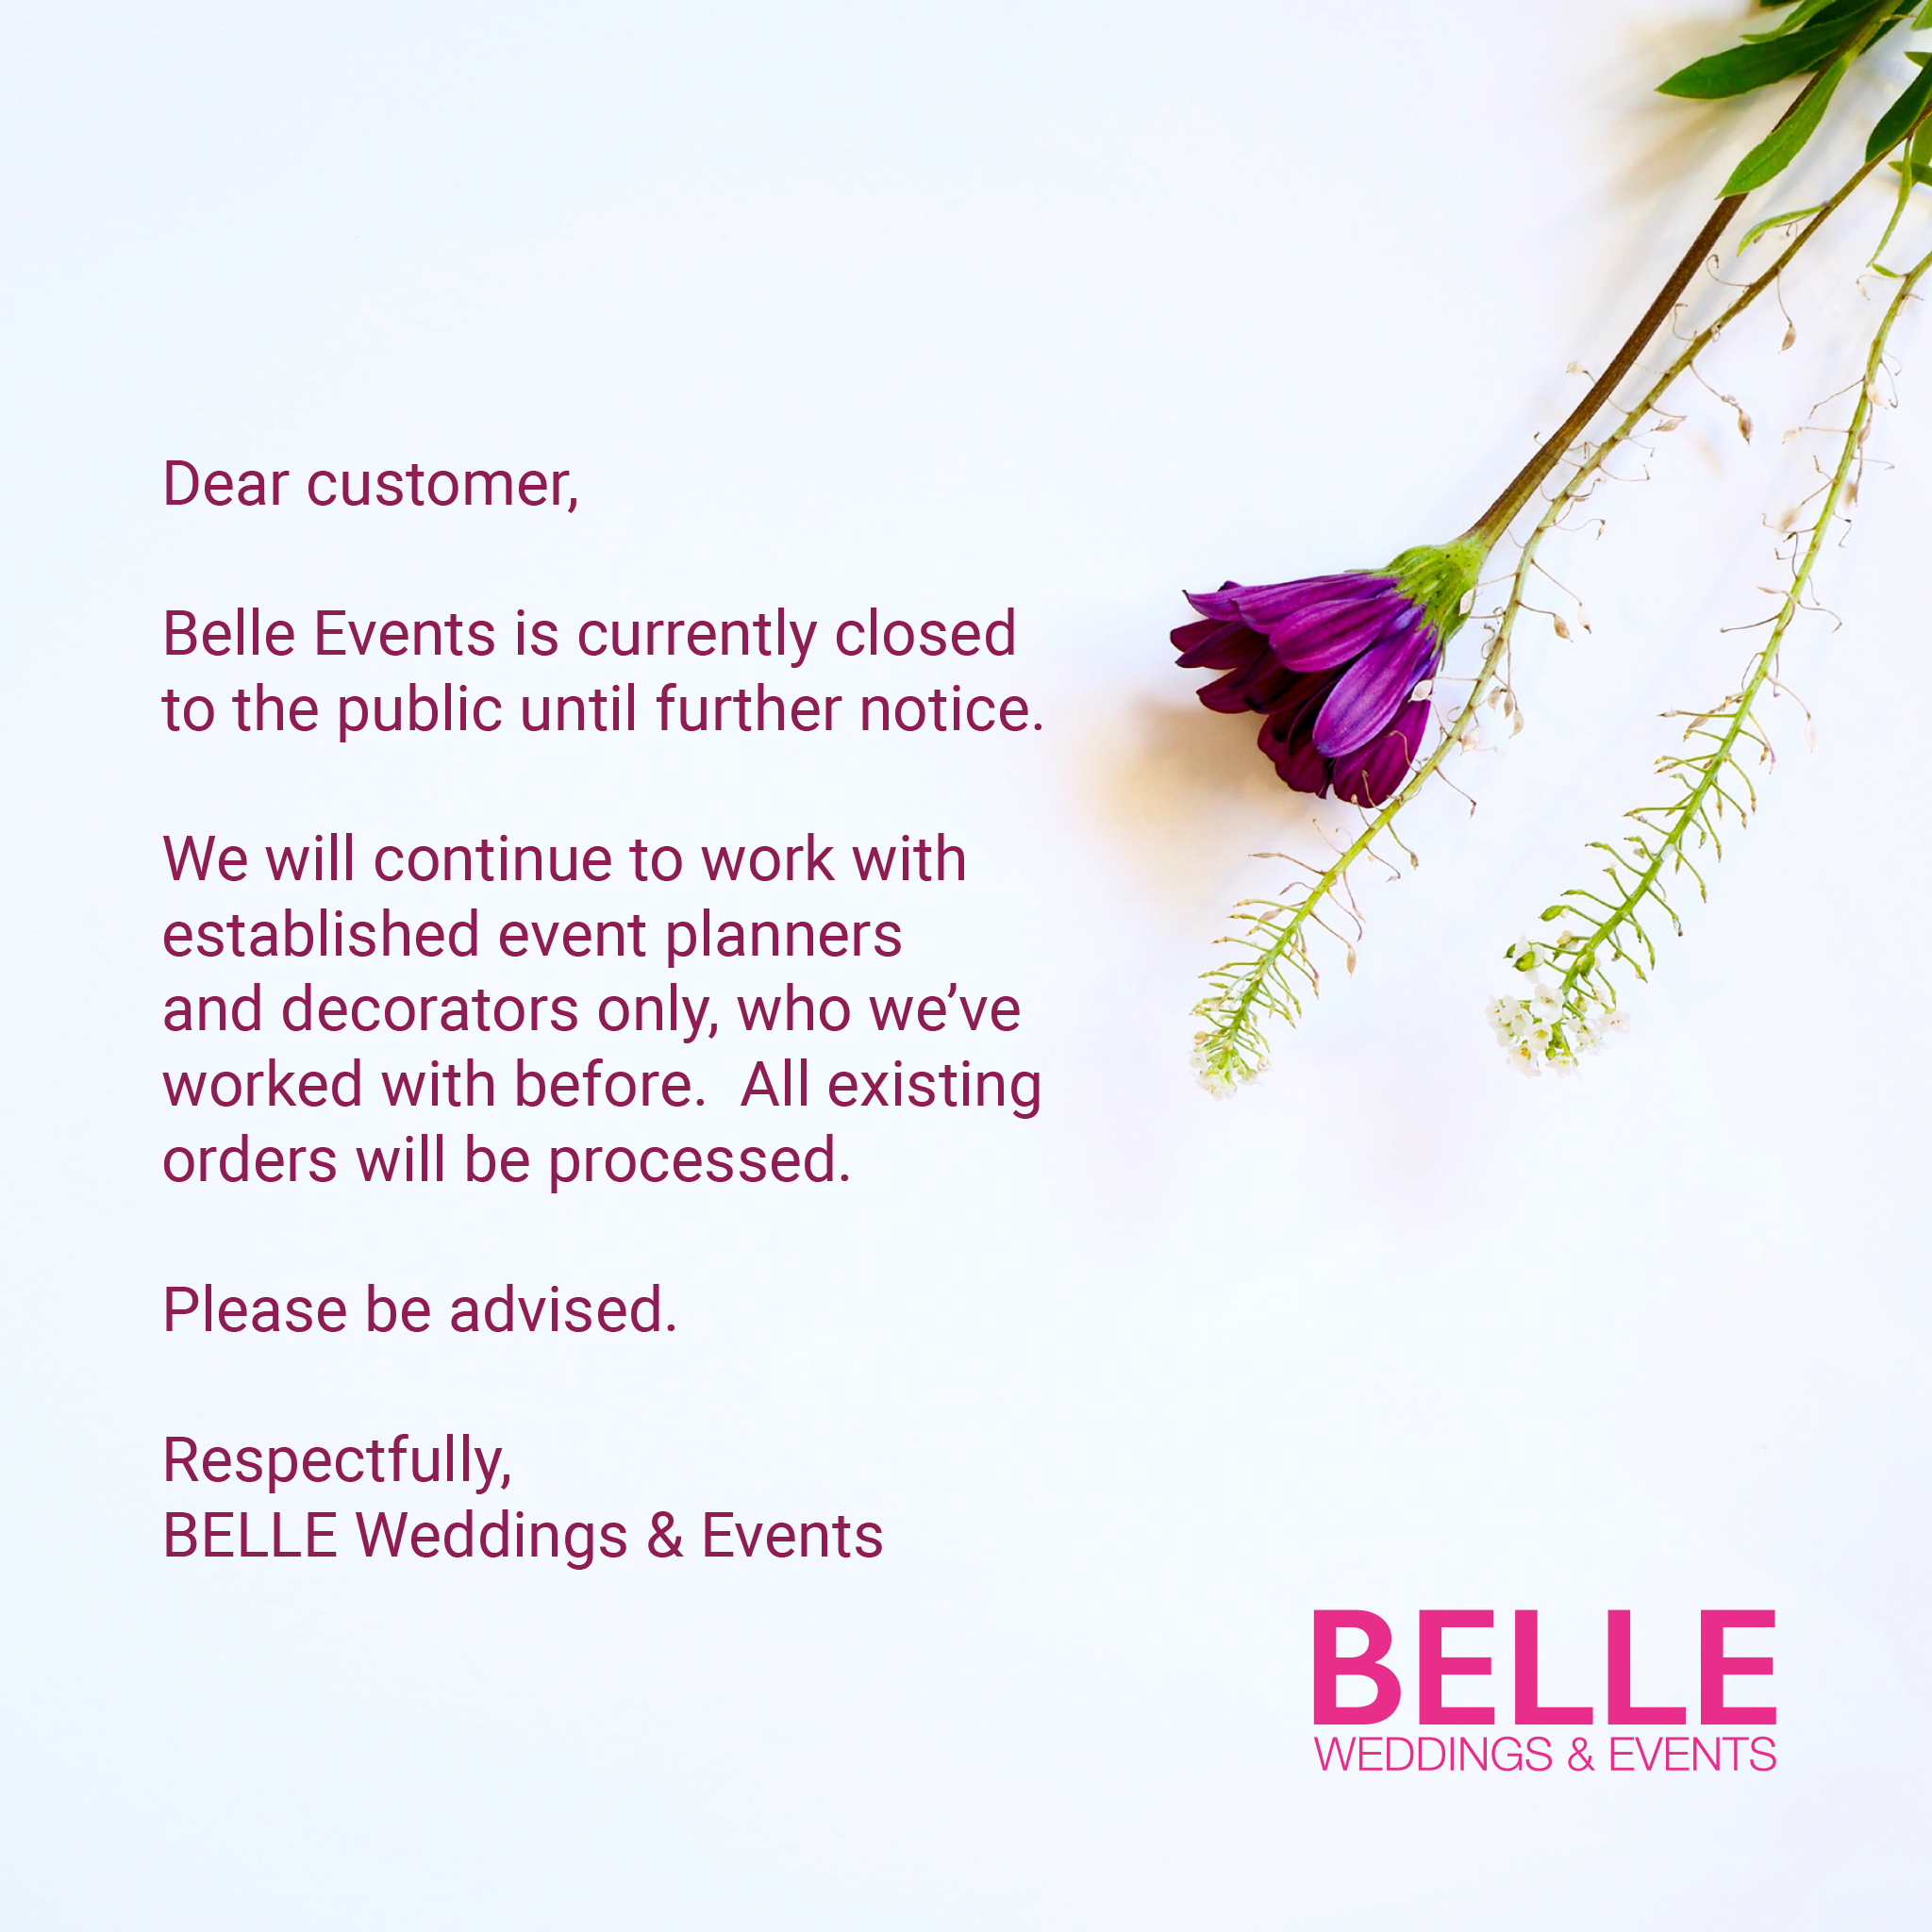 Belle Weddings & Events is currently closed to the public until further notice